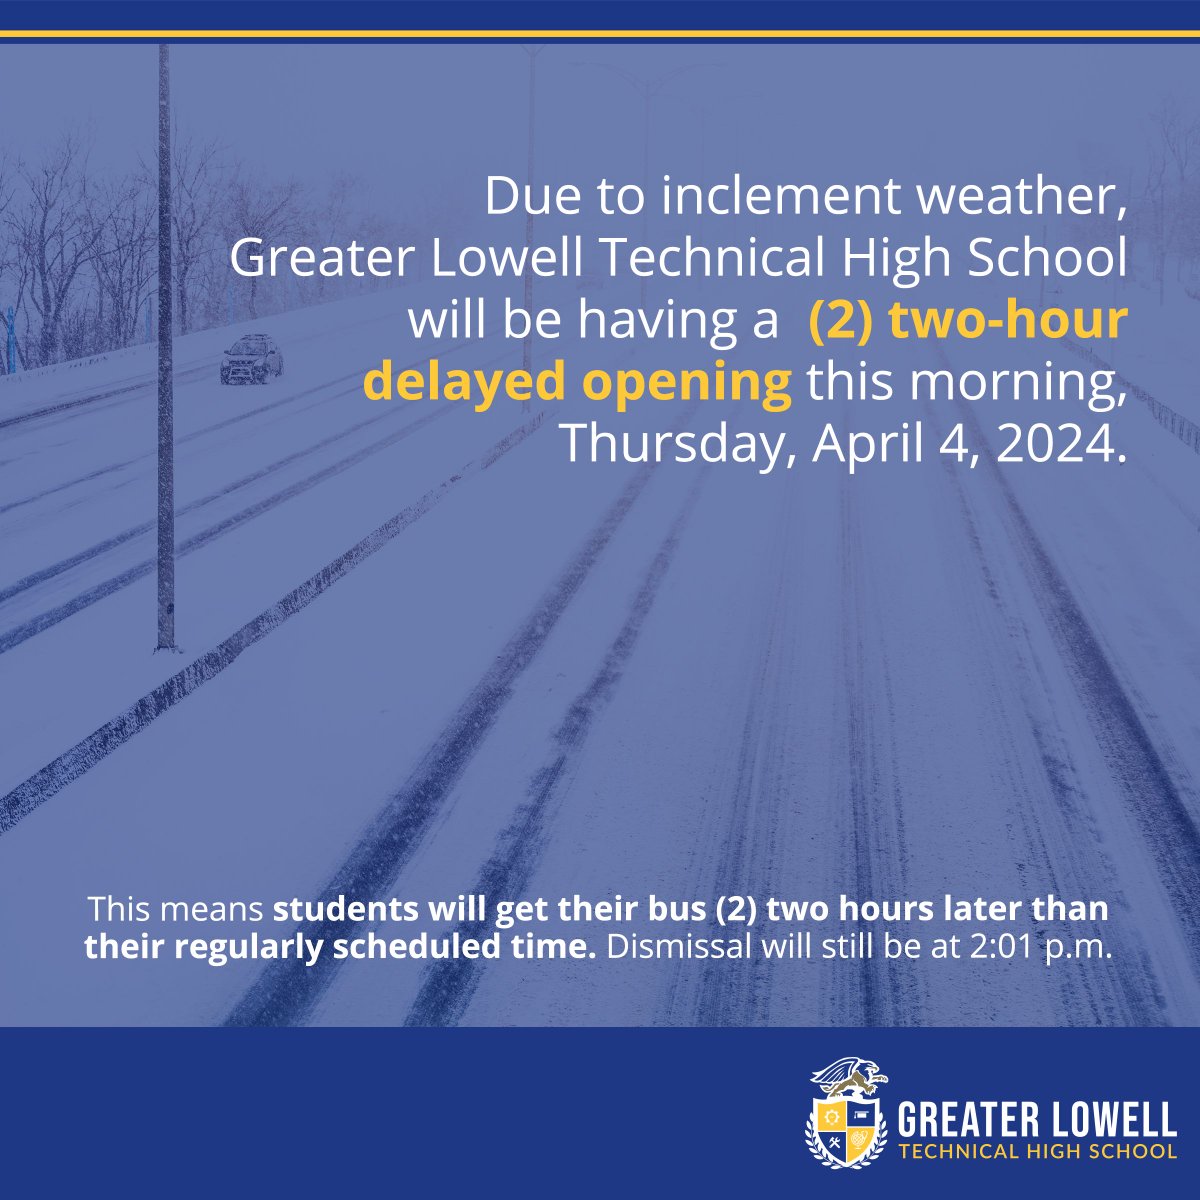 Due to inclement weather, Greater Lowell Technical High School will be having a (2) two hour delayed opening today, Thursday, April 4, 2024. This means students will get their bus (2) two hours later than their regularly scheduled time. Dismissal will still be at 2:01 p.m.